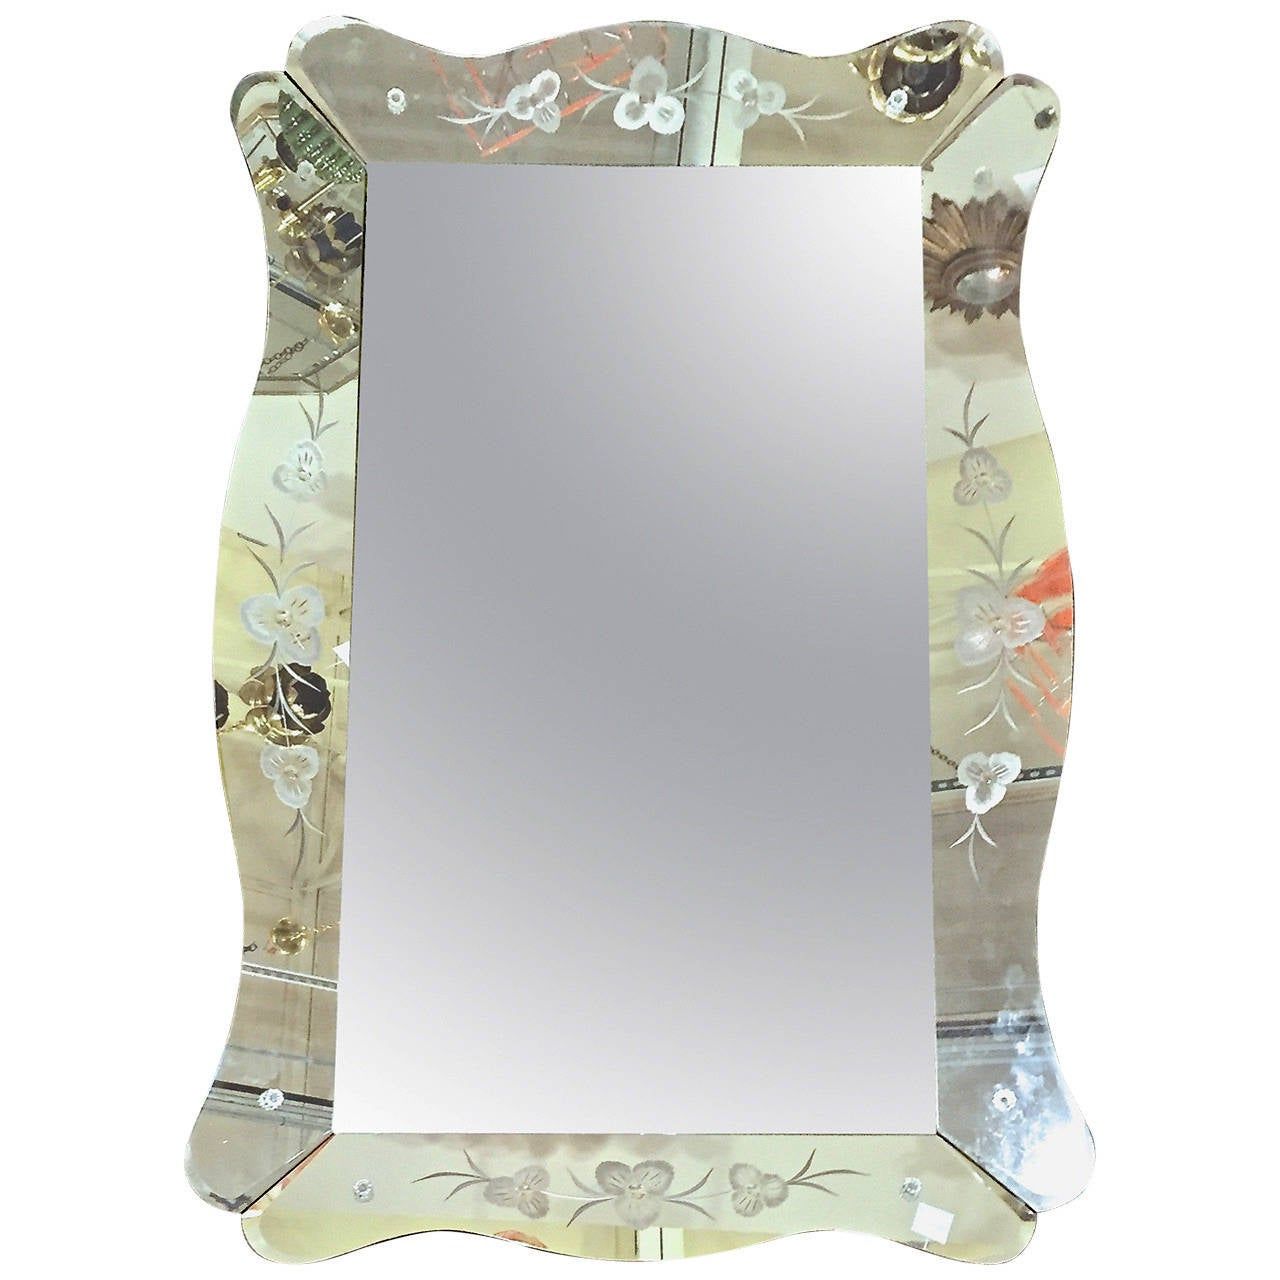 Smoke Edge Wall Mirrors Pertaining To Best And Newest Large Art Deco Etched Curved Edge Wall Mirror At 1stdibs (View 6 of 15)